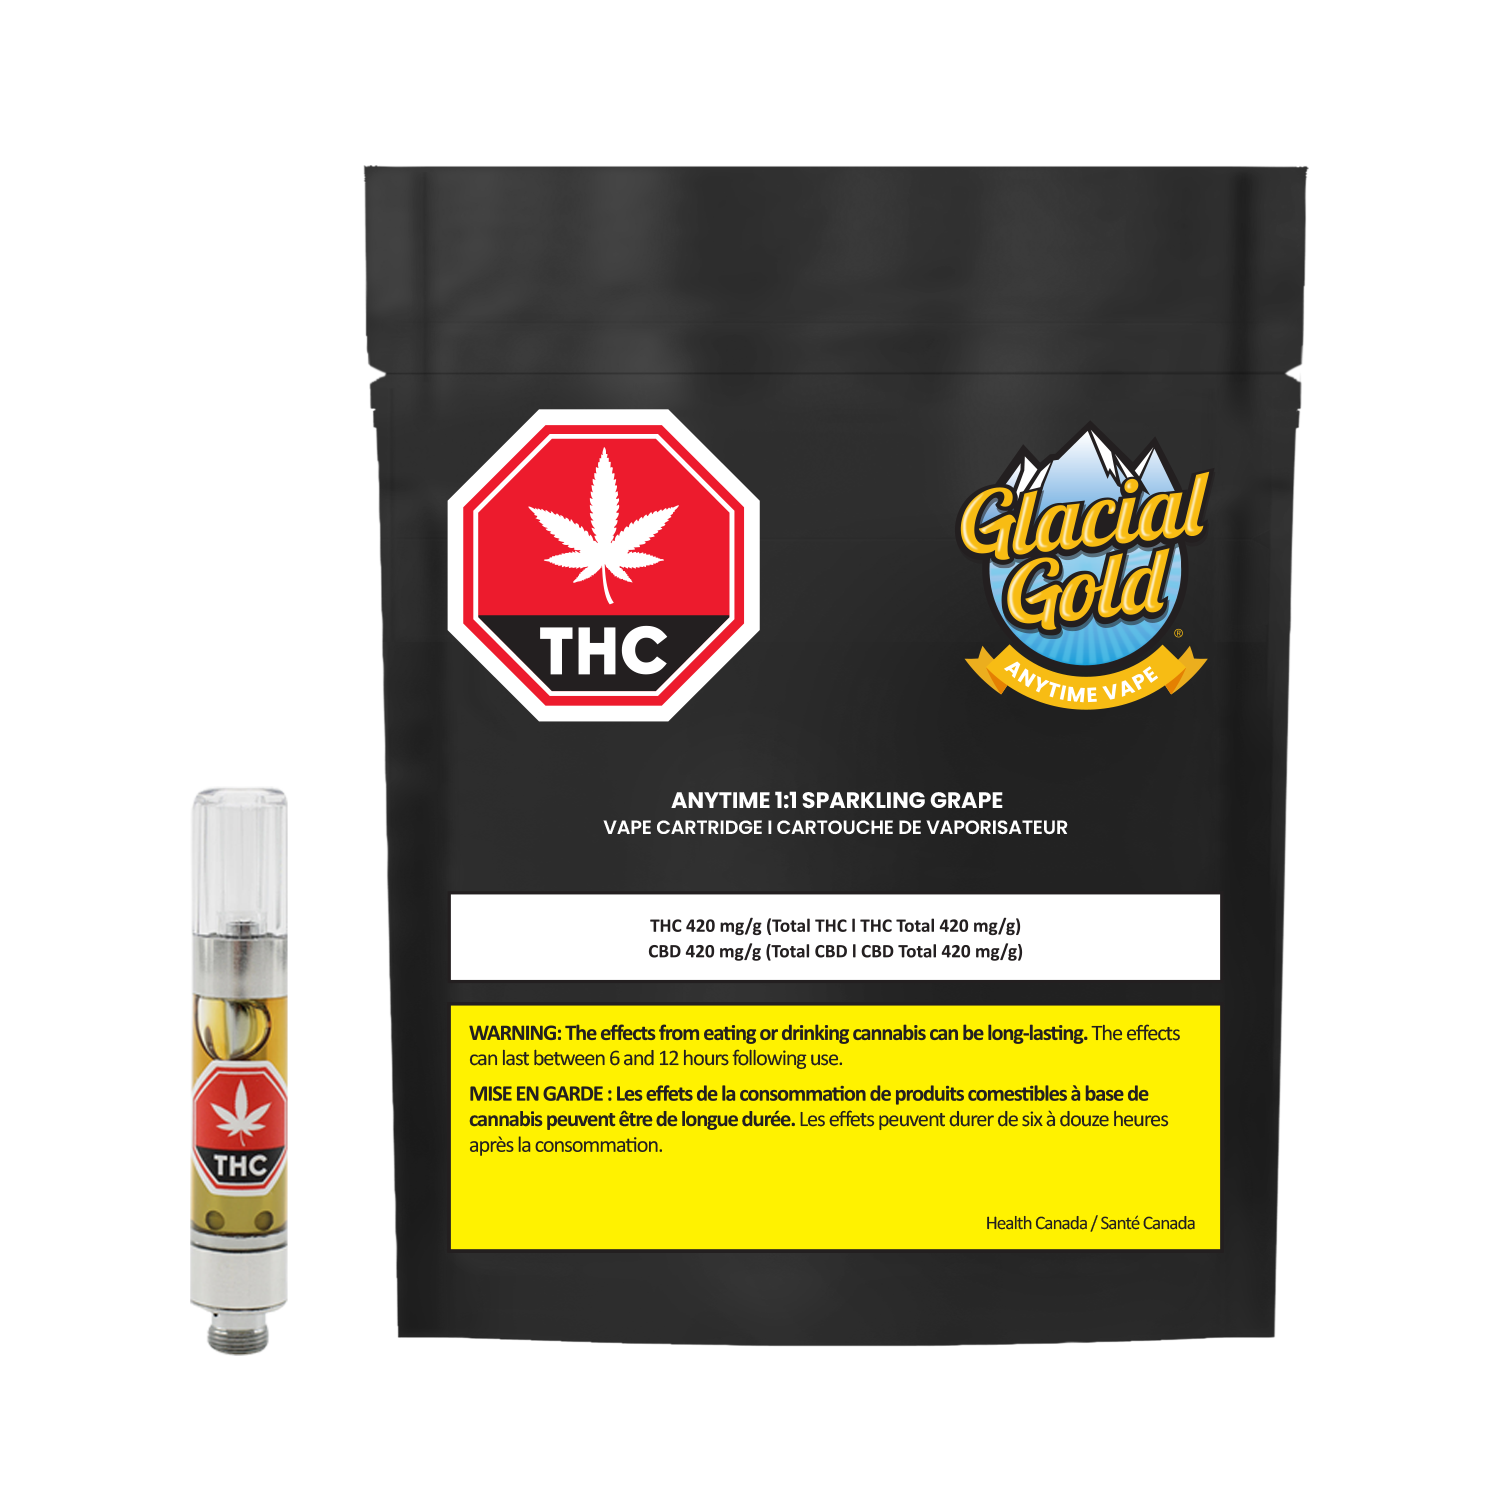 Cannabis Product Glacial Gold - Anytime 1:1 Sparkling Grape 1g Vape by Glacial Gold - 1